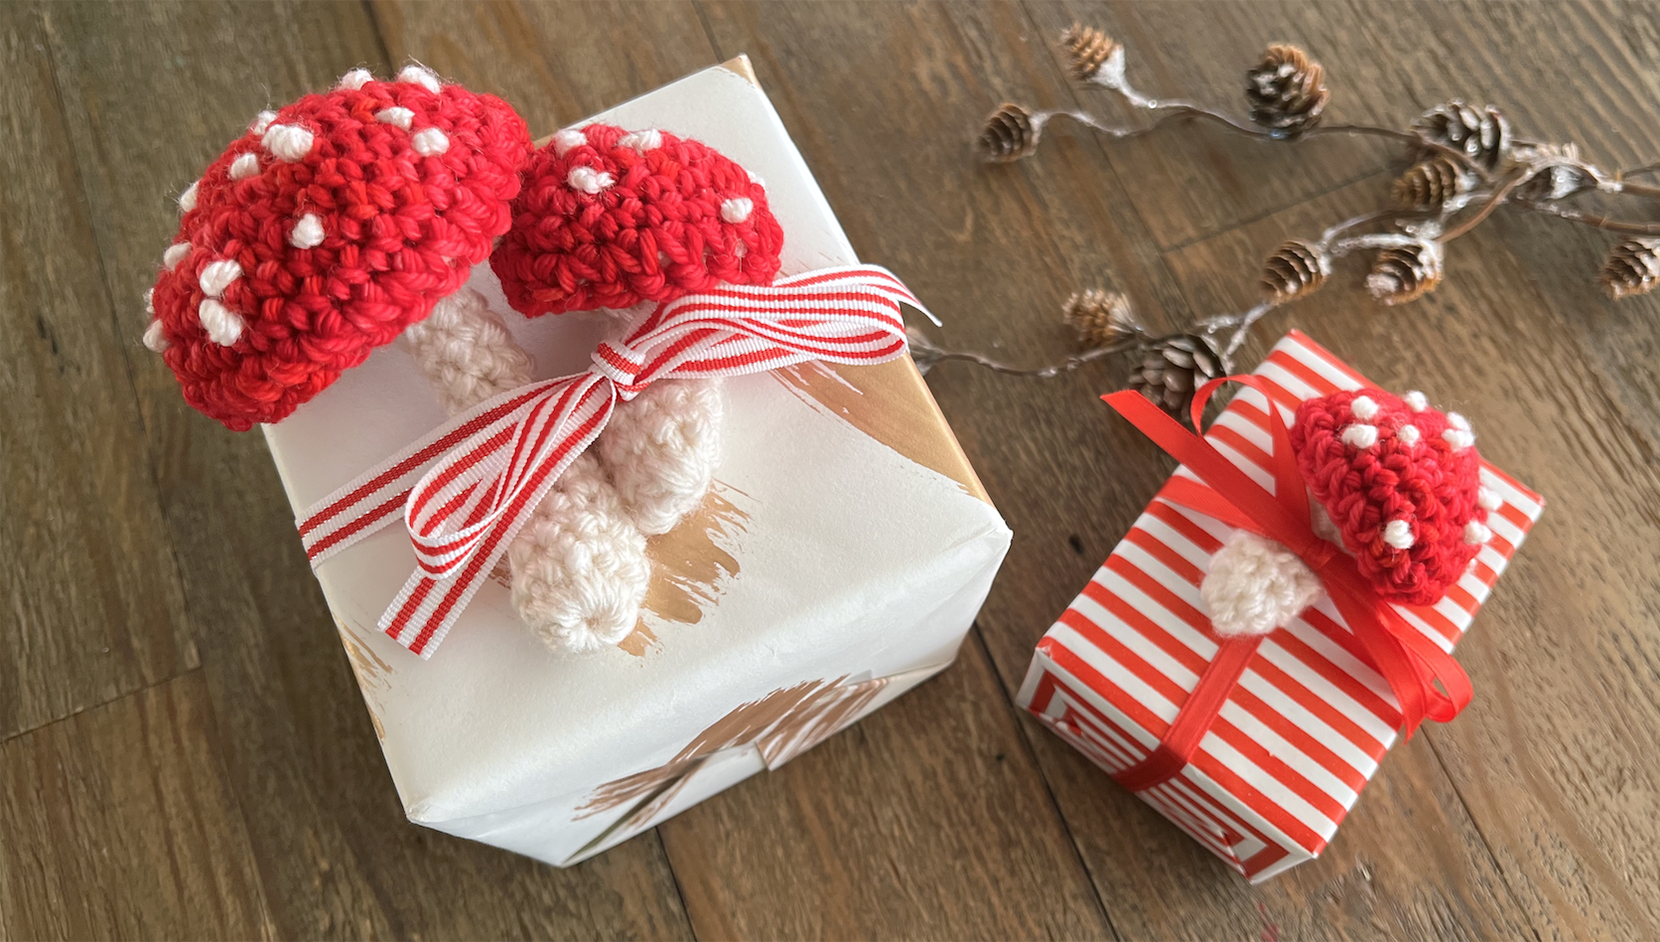 image of small red and white crocheted mushrooms on top of gift boxes warpped in red and white paper